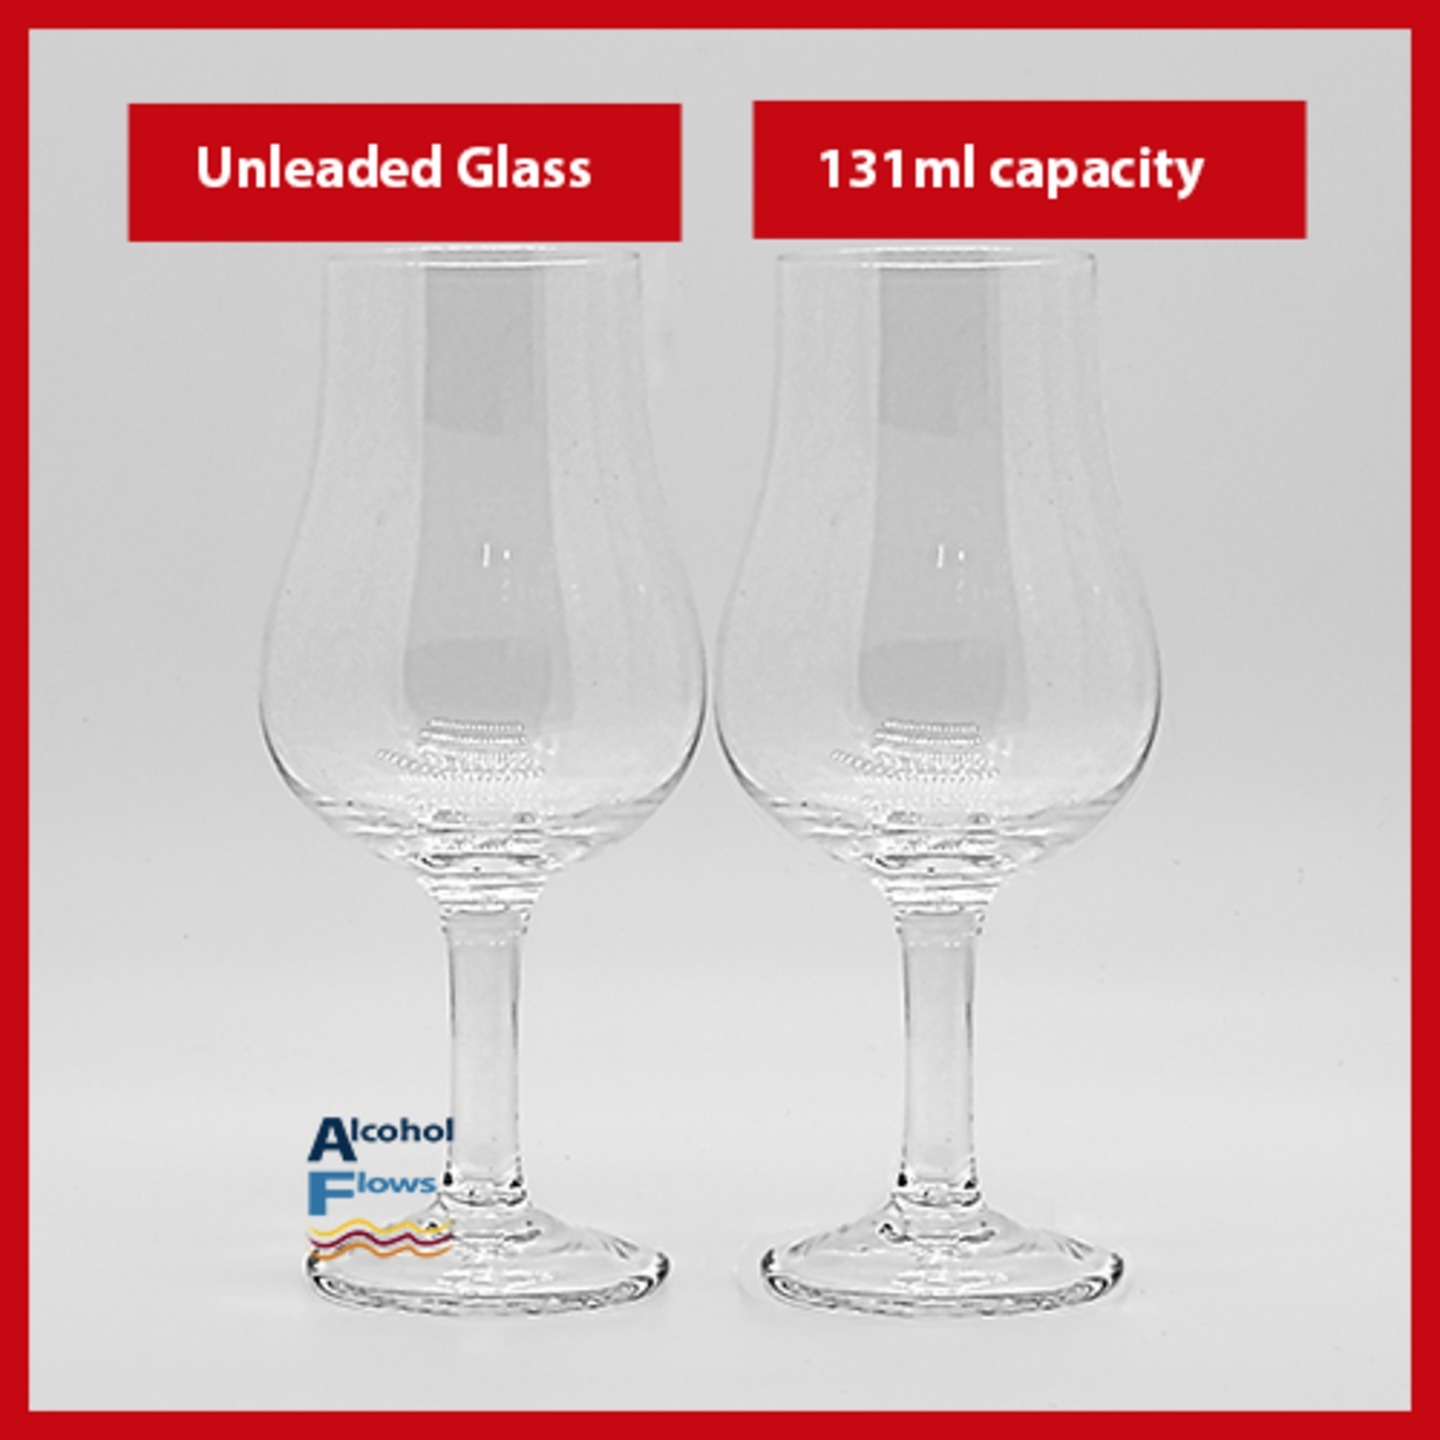 Unleaded Whisky Nosing Glass with stem - Hand Blown